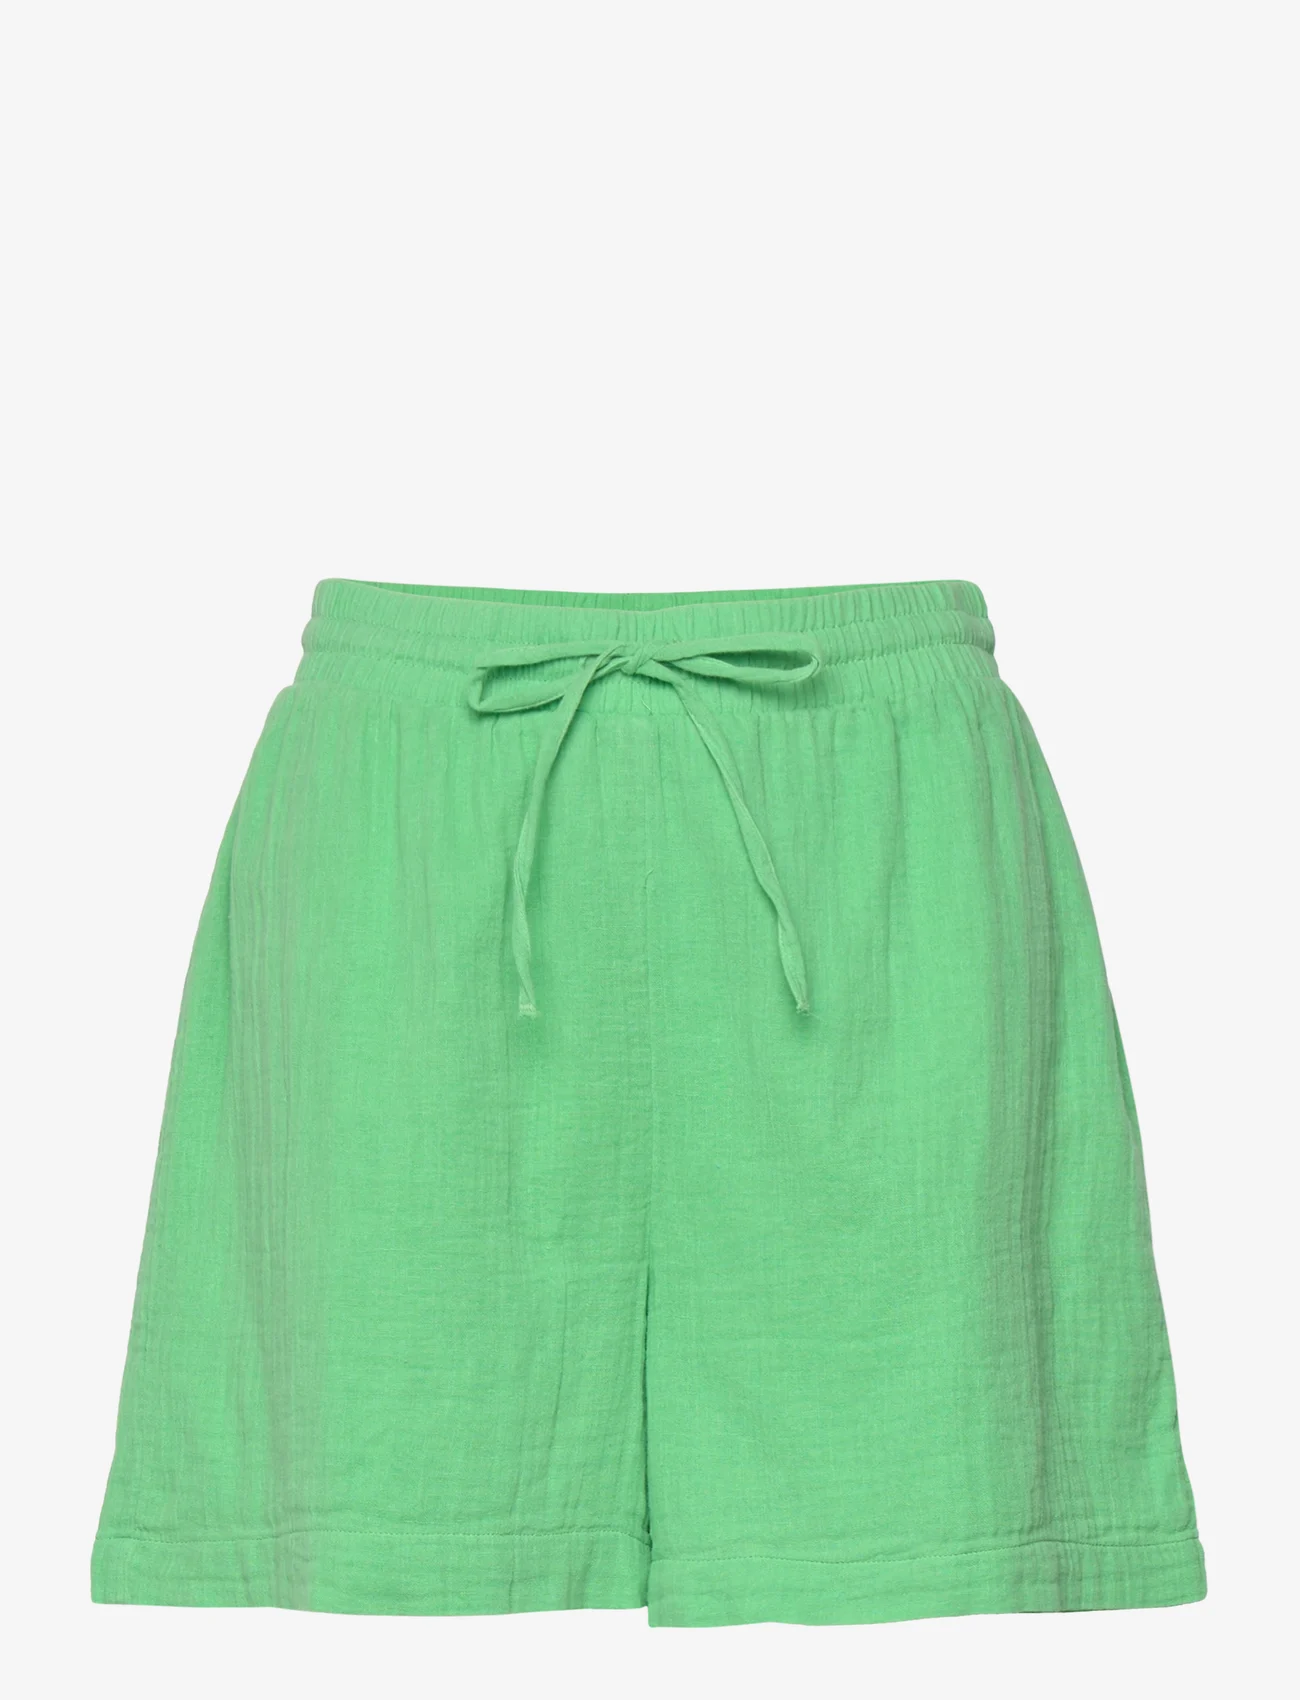 Pieces - PCMASTINA HW SHORTS - lowest prices - absinthe green - 0